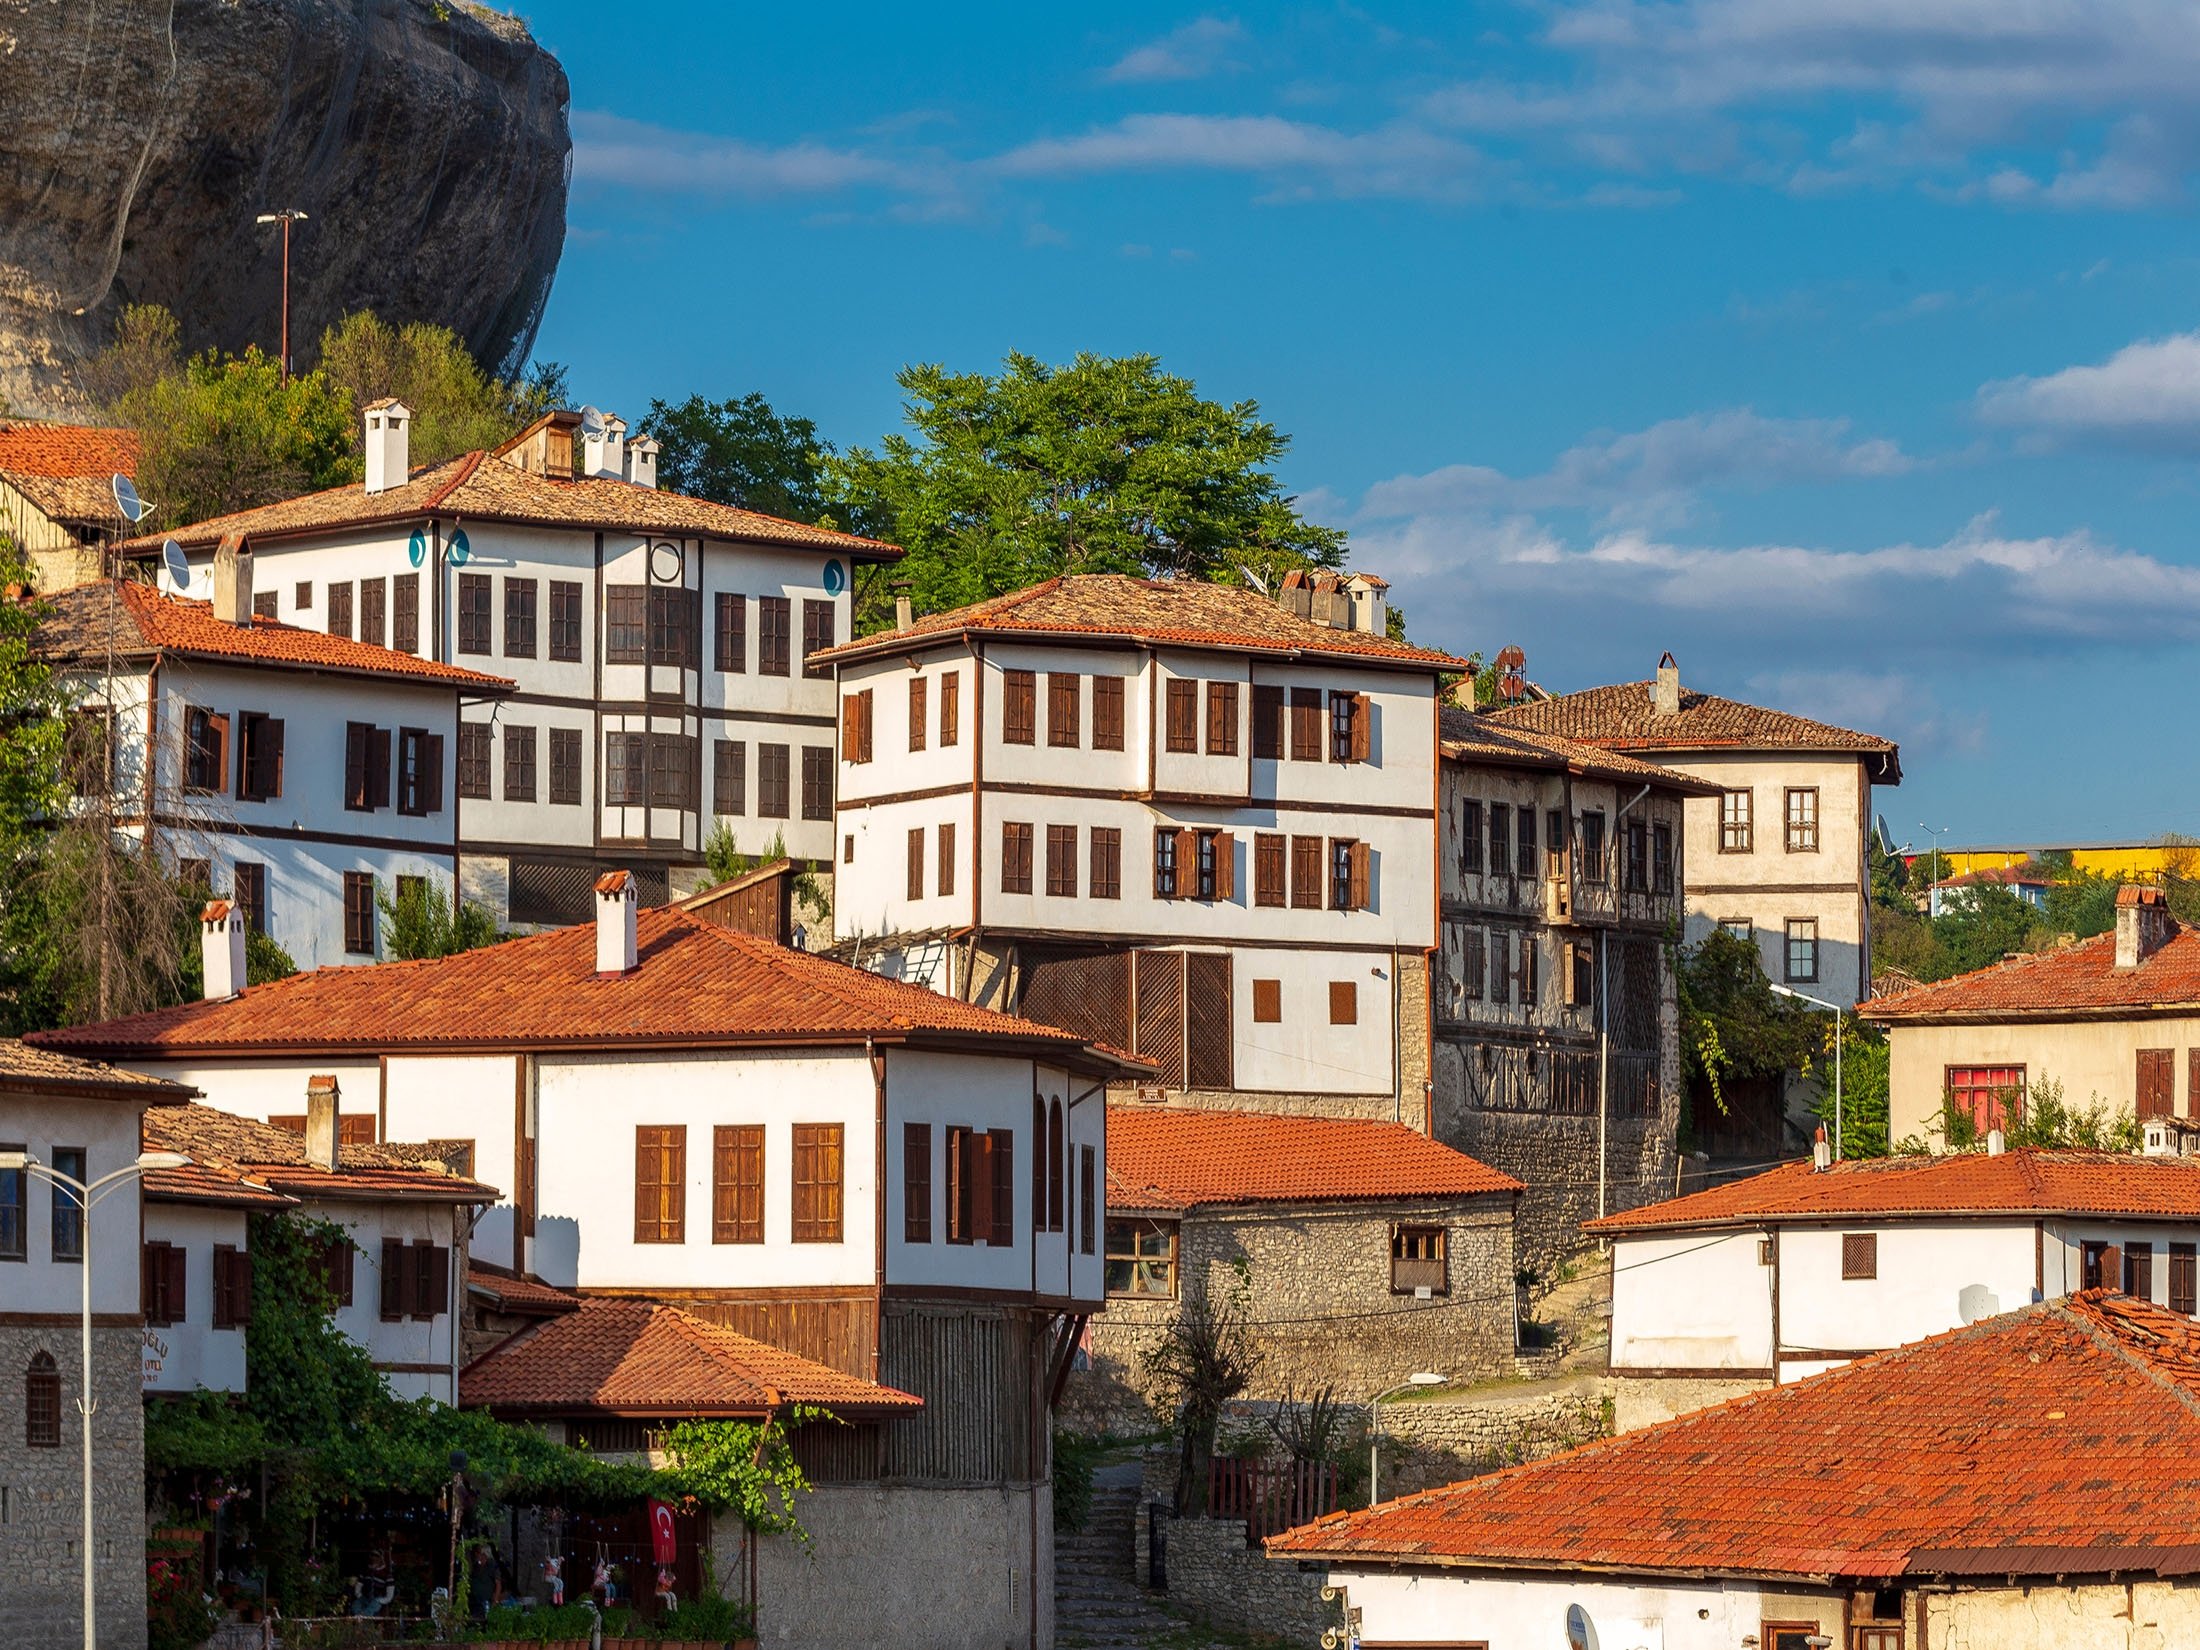 Safranbolu is a typical Ottoman city with gorgeous architecture across the streets, in Karabük, northern Turkey, March 1, 2020. (Shutterstock Photo)